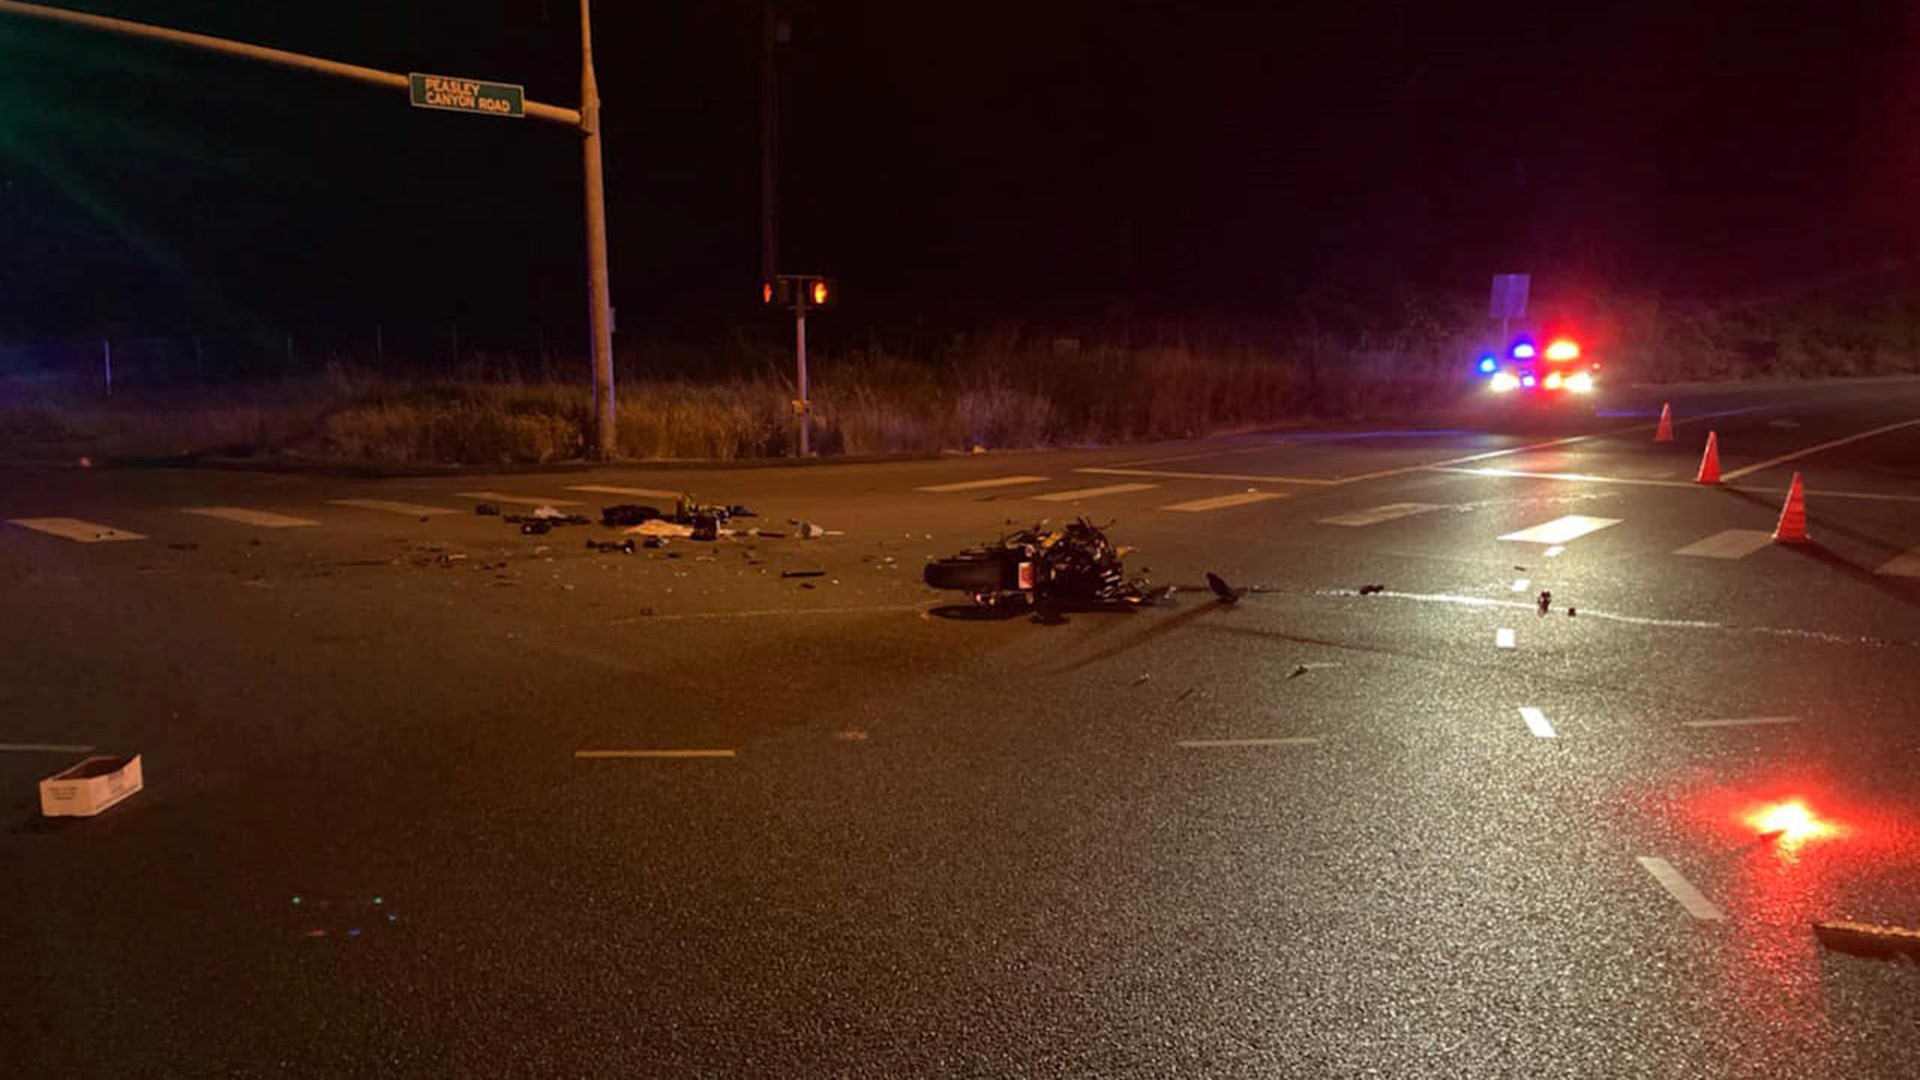 The Auburn Police Department is investigating two fatal hit-and-runs that occurred within an hour Thursday night. One person was taken into custody.